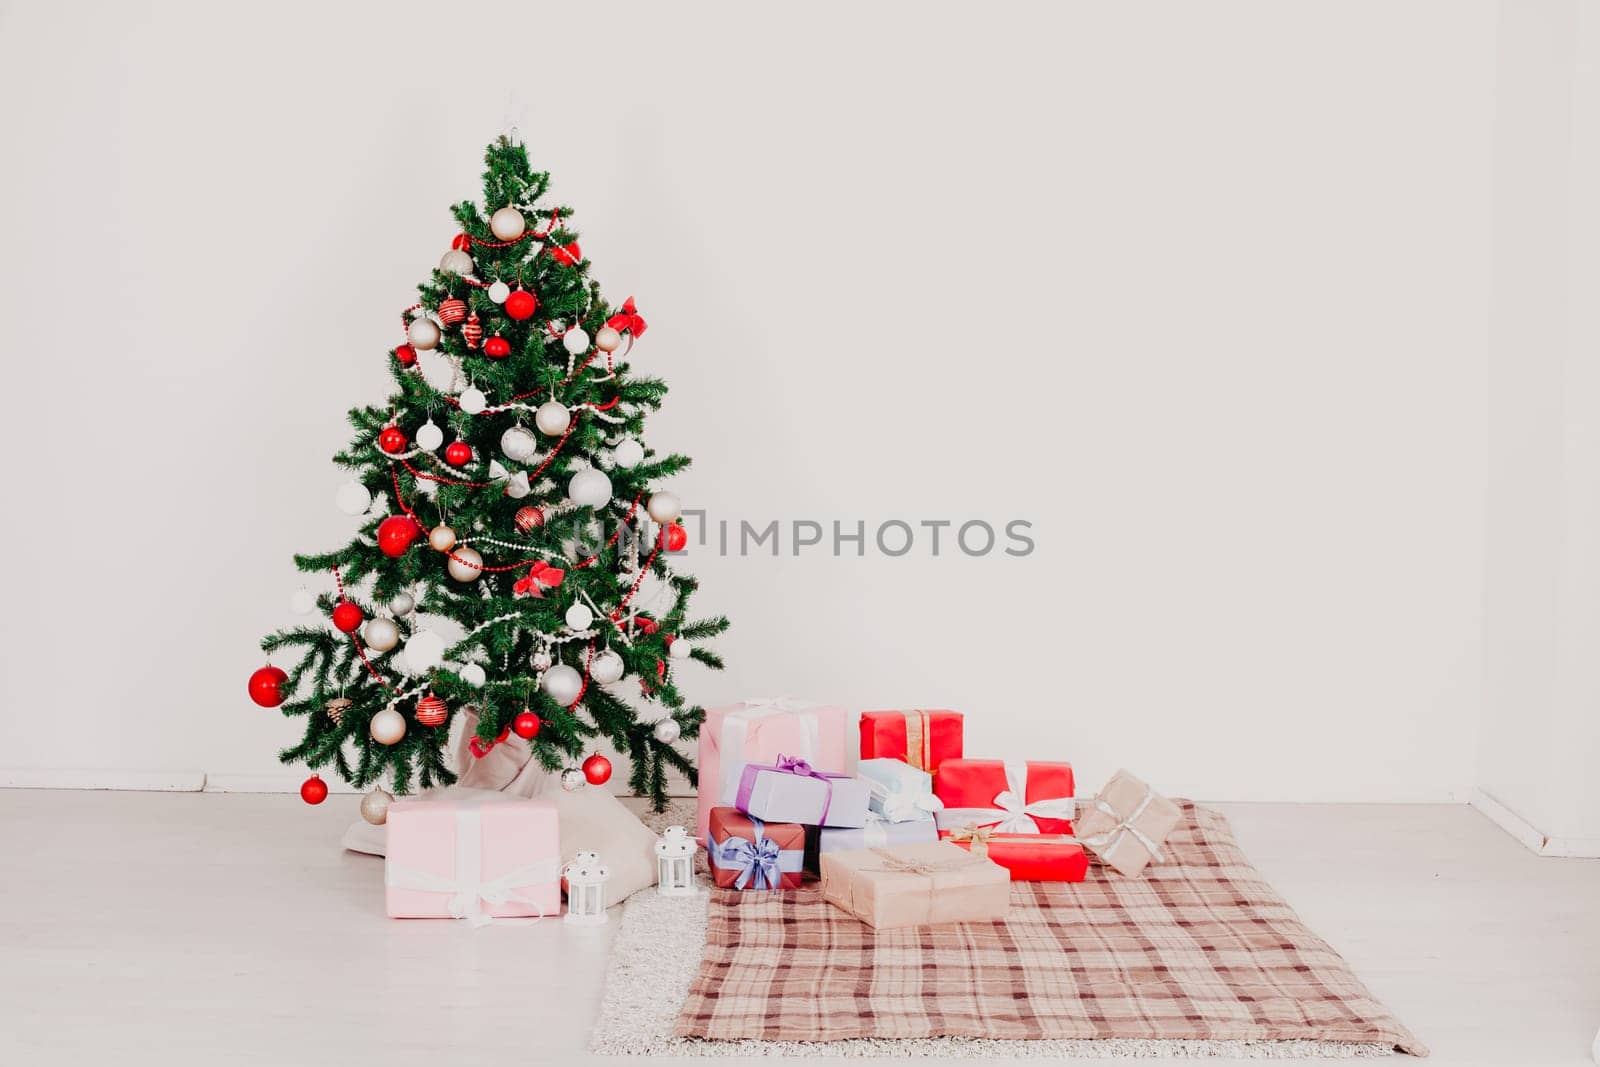 Christmas tree in white interior with toy stuffers decor